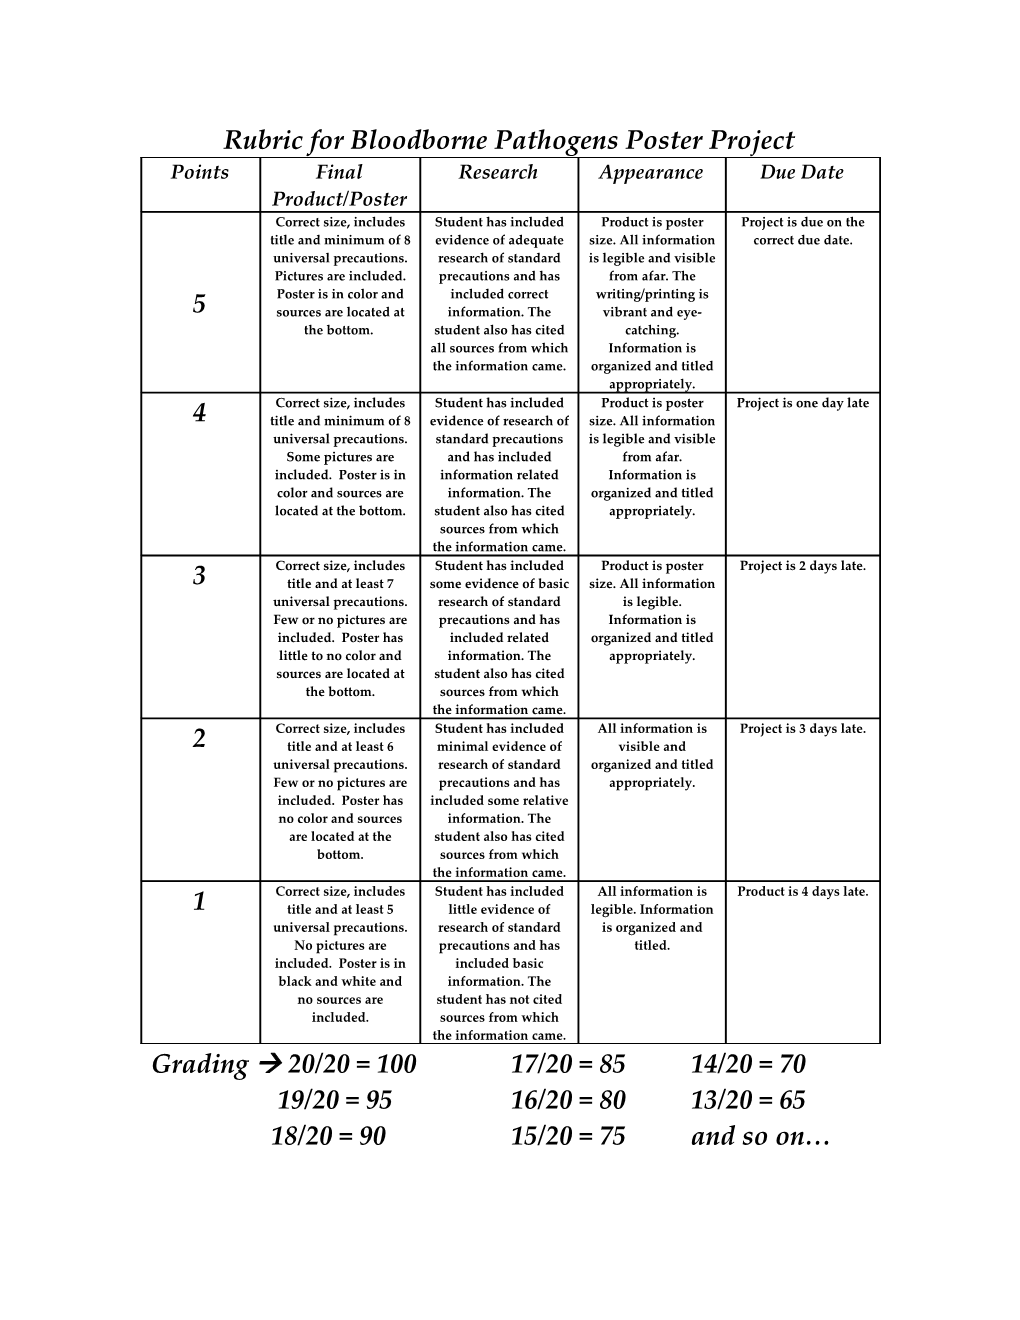 Rubric for Training Room Design Project